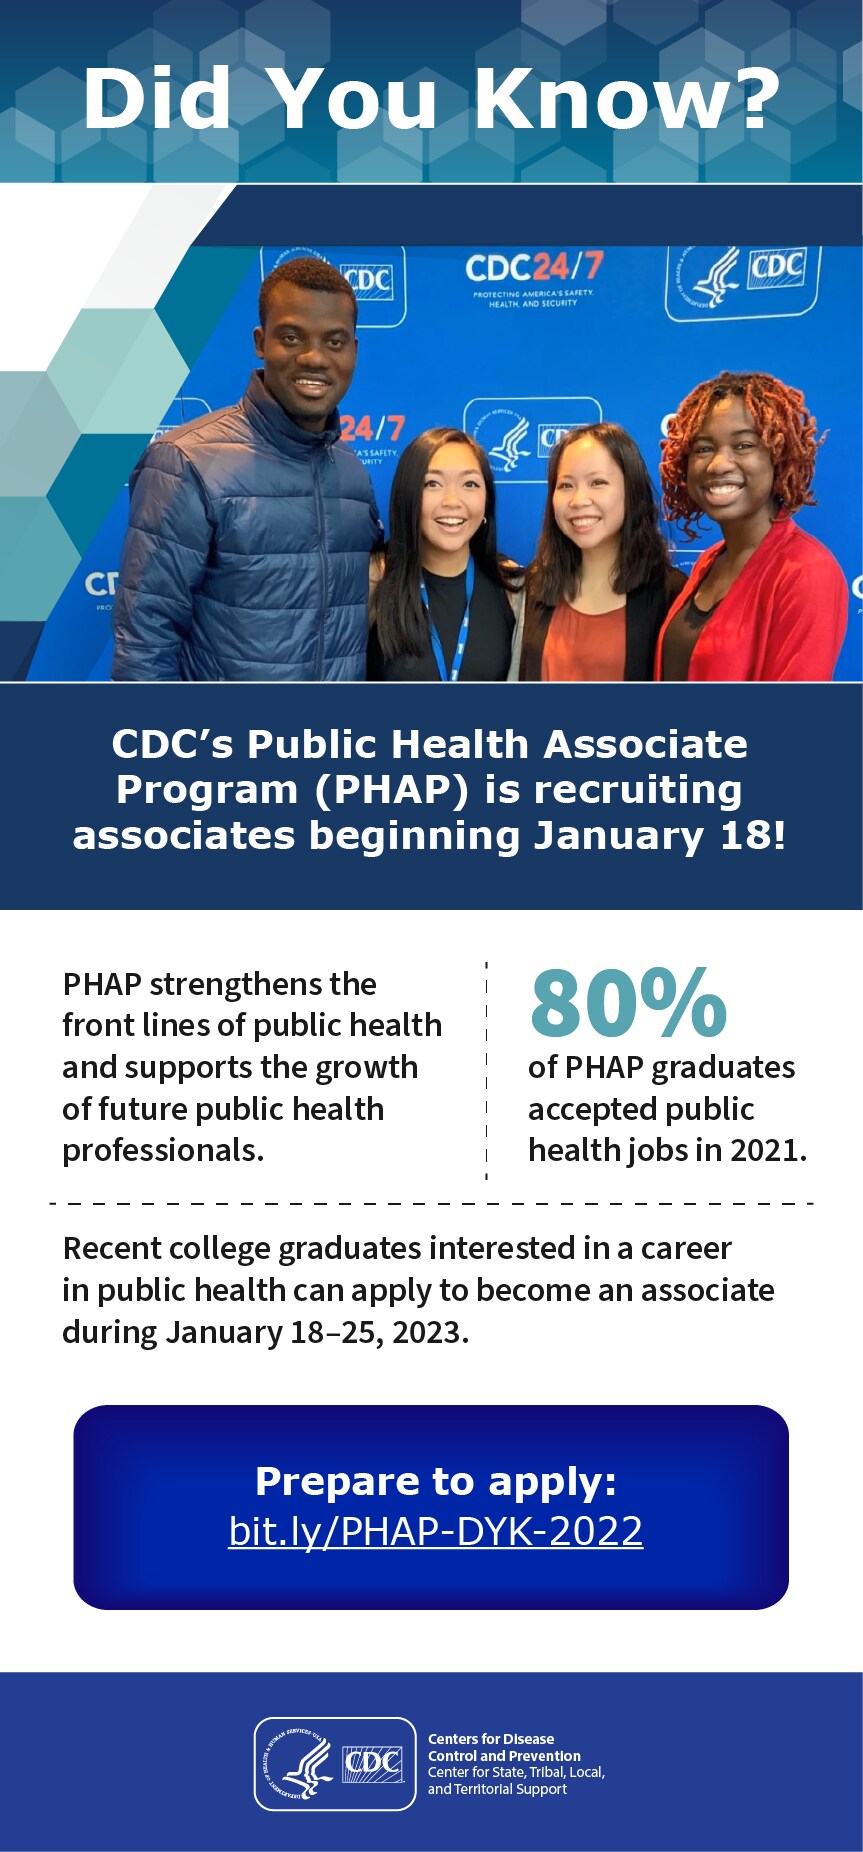 An infographic titled Did You Know? Text says: CDC’s Public Health Associate Program (PHAP) is recruiting associates beginning January 18! PHAP strengthens the front lines of public health and supports the growth of future public health professionals. 80% of PHAP graduates accepted public health jobs in 2021. Recent college graduates interested in a career in public health can apply to become an associate during January 18–25, 2023. Prepare to apply: bit.ly/PHAP-DYK-2022